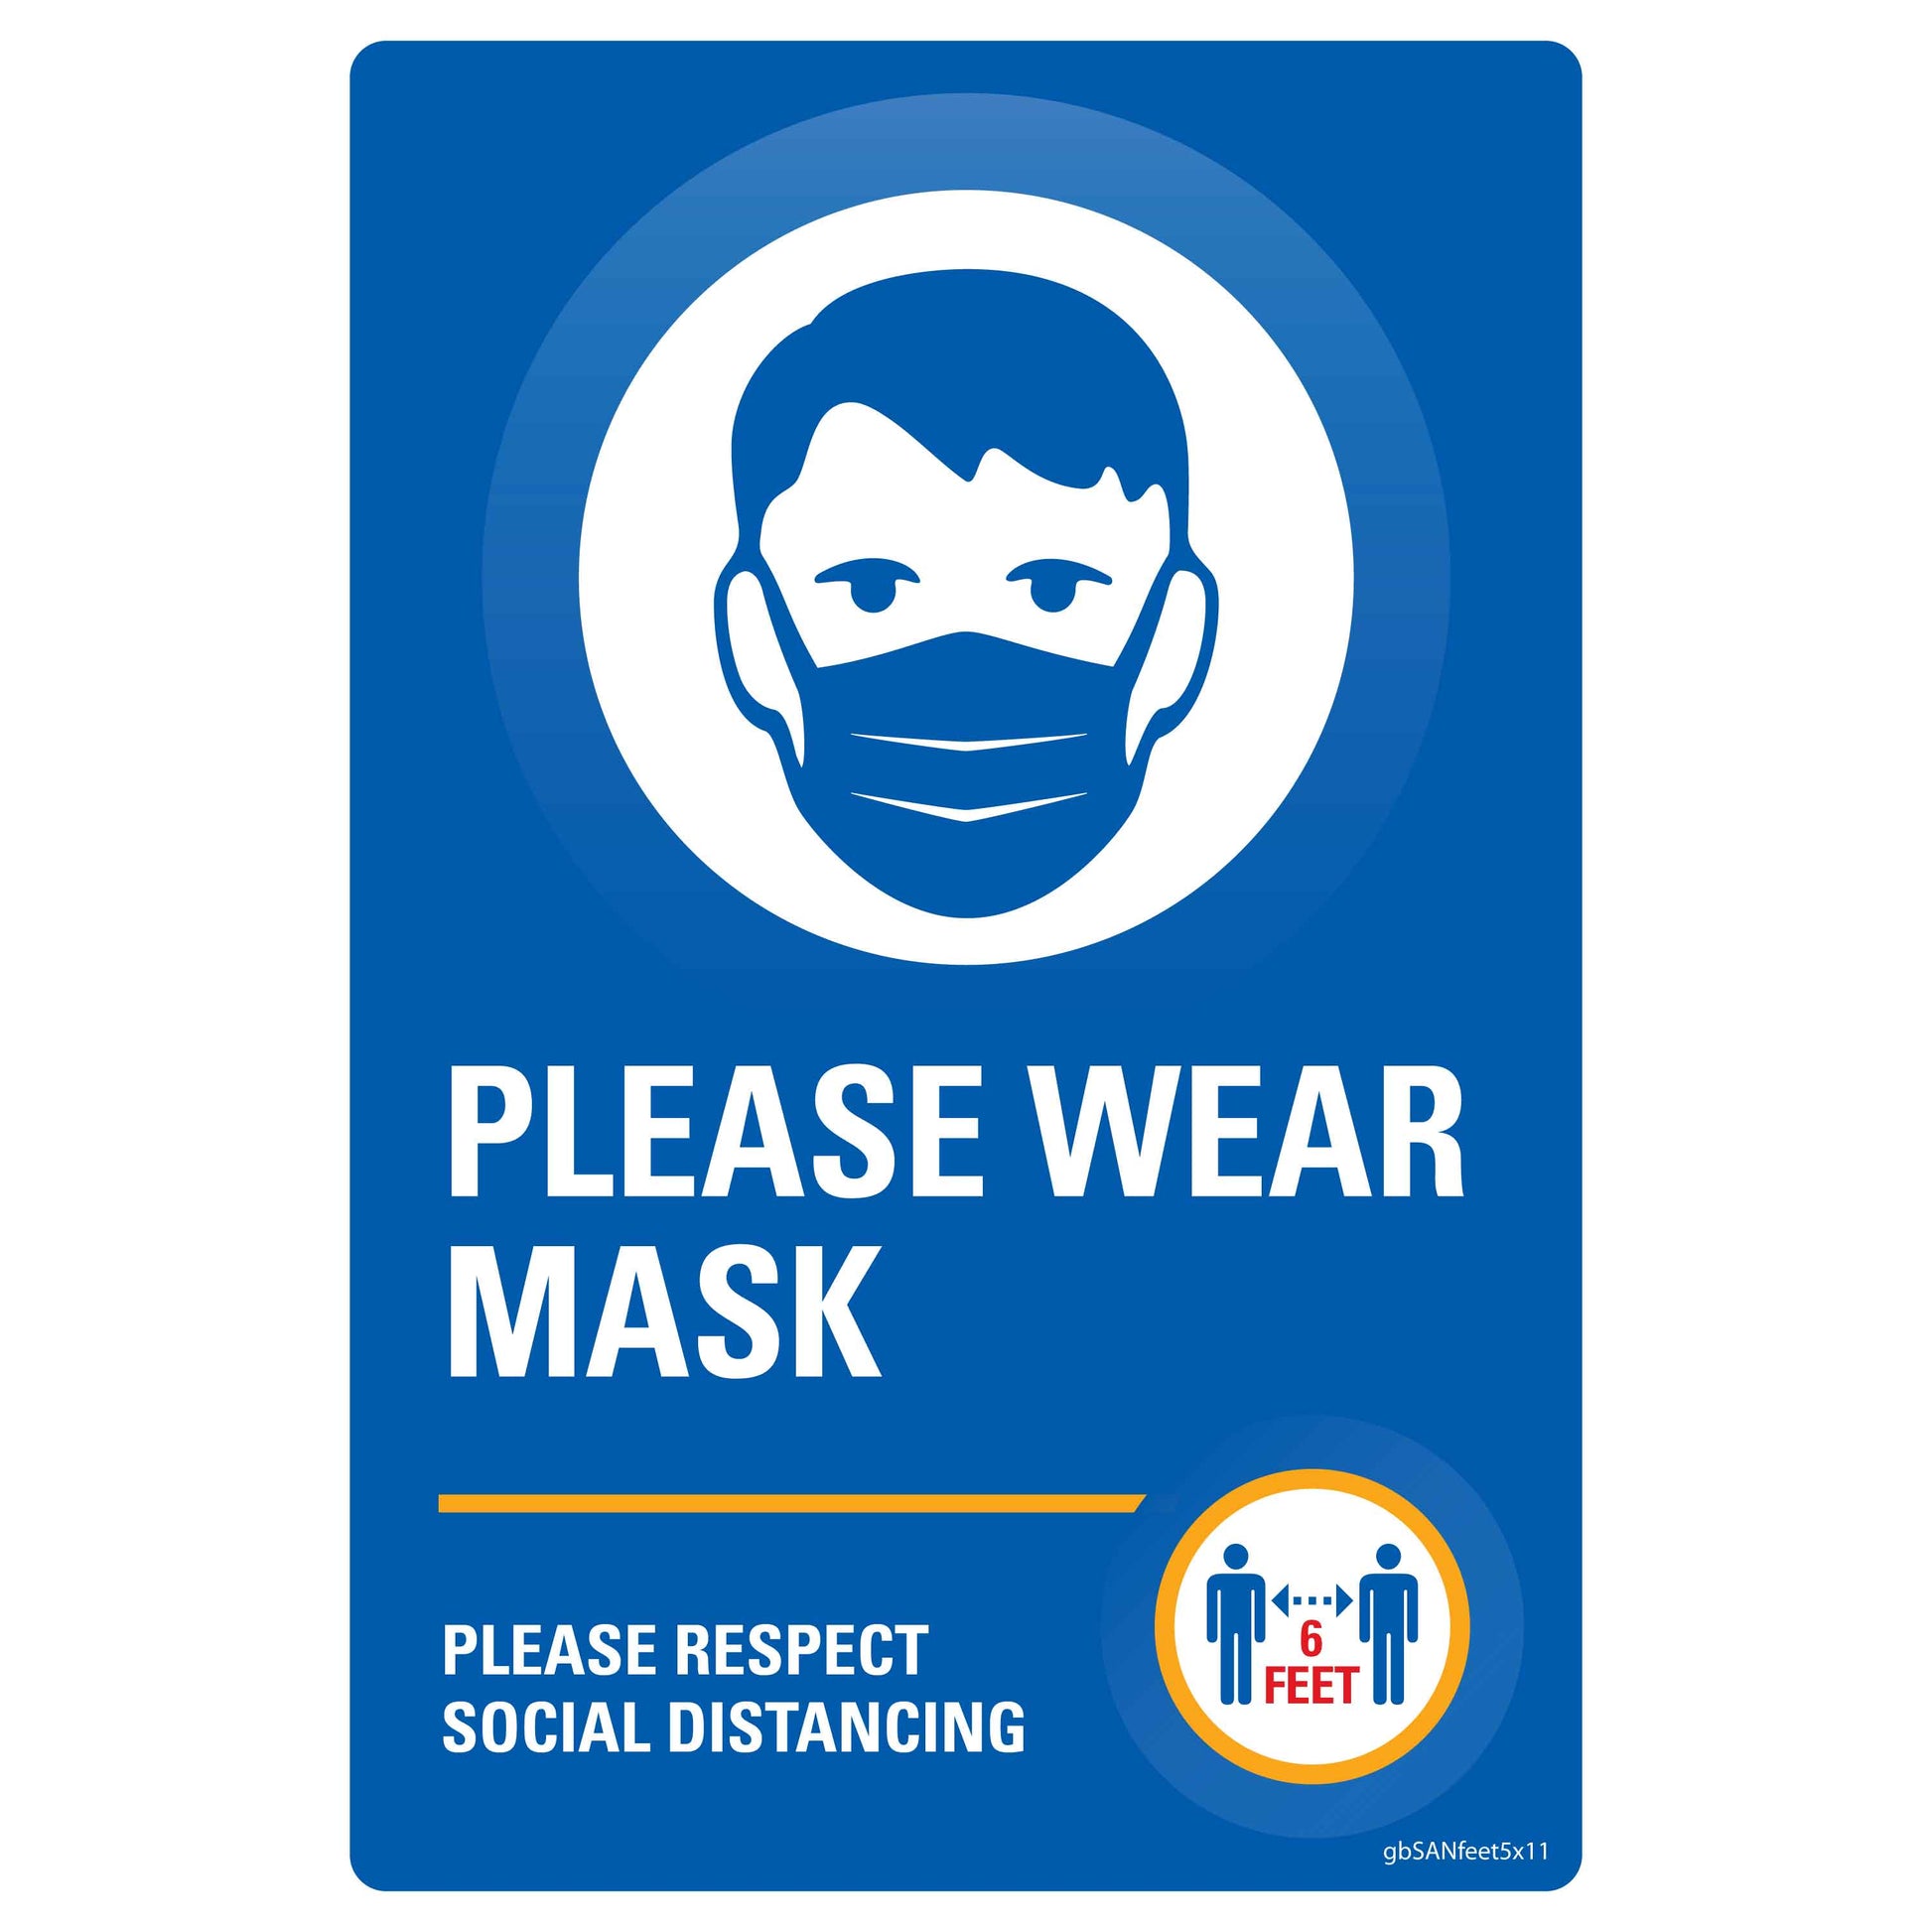 Wear a Mask Decal. 4 inches by 6 inches in size. 